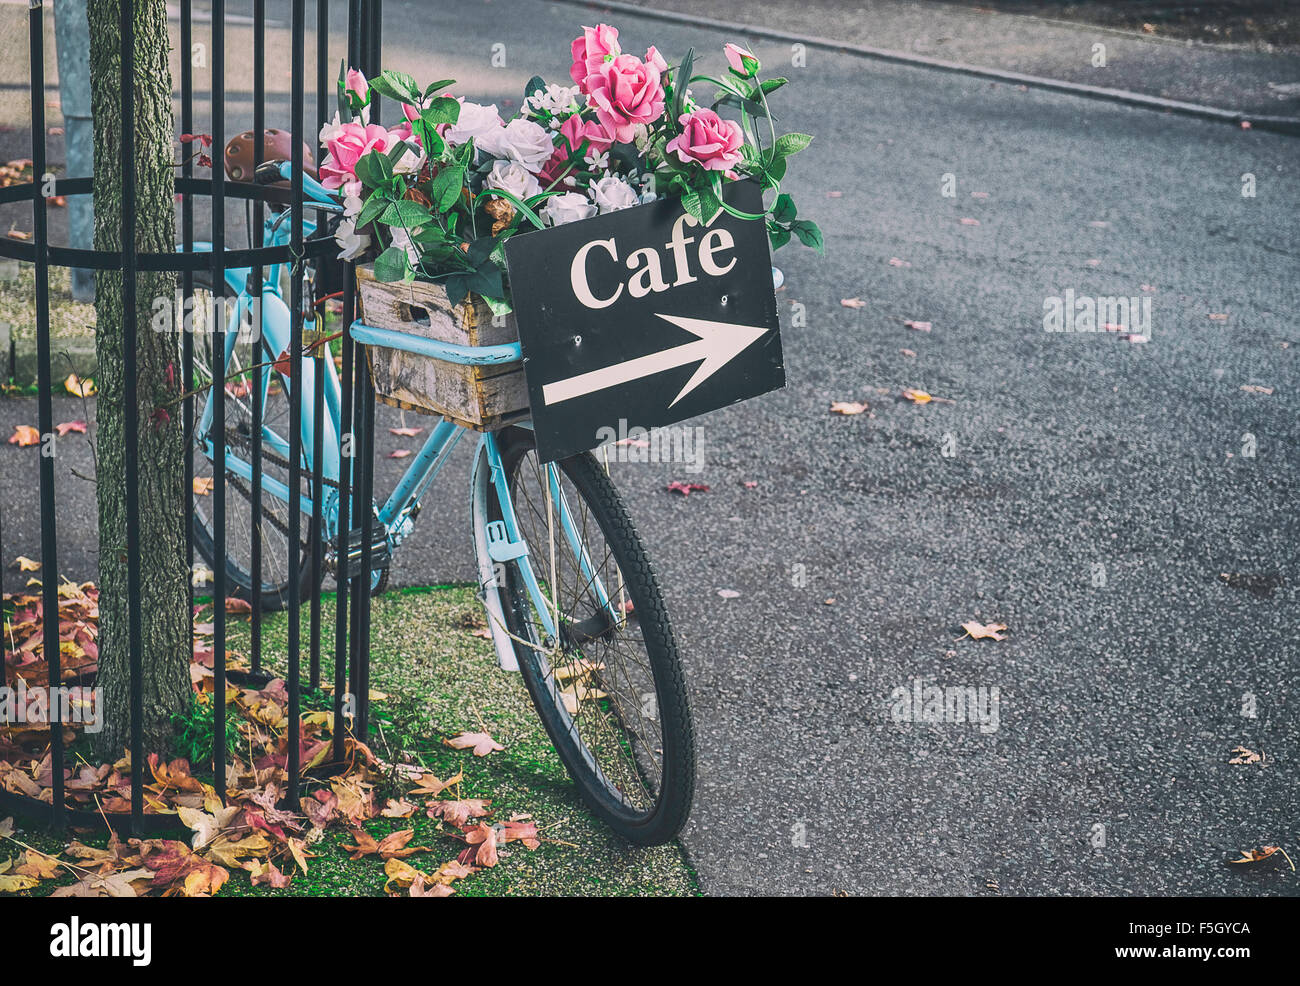 café sign in bicycle basket Stock Photo